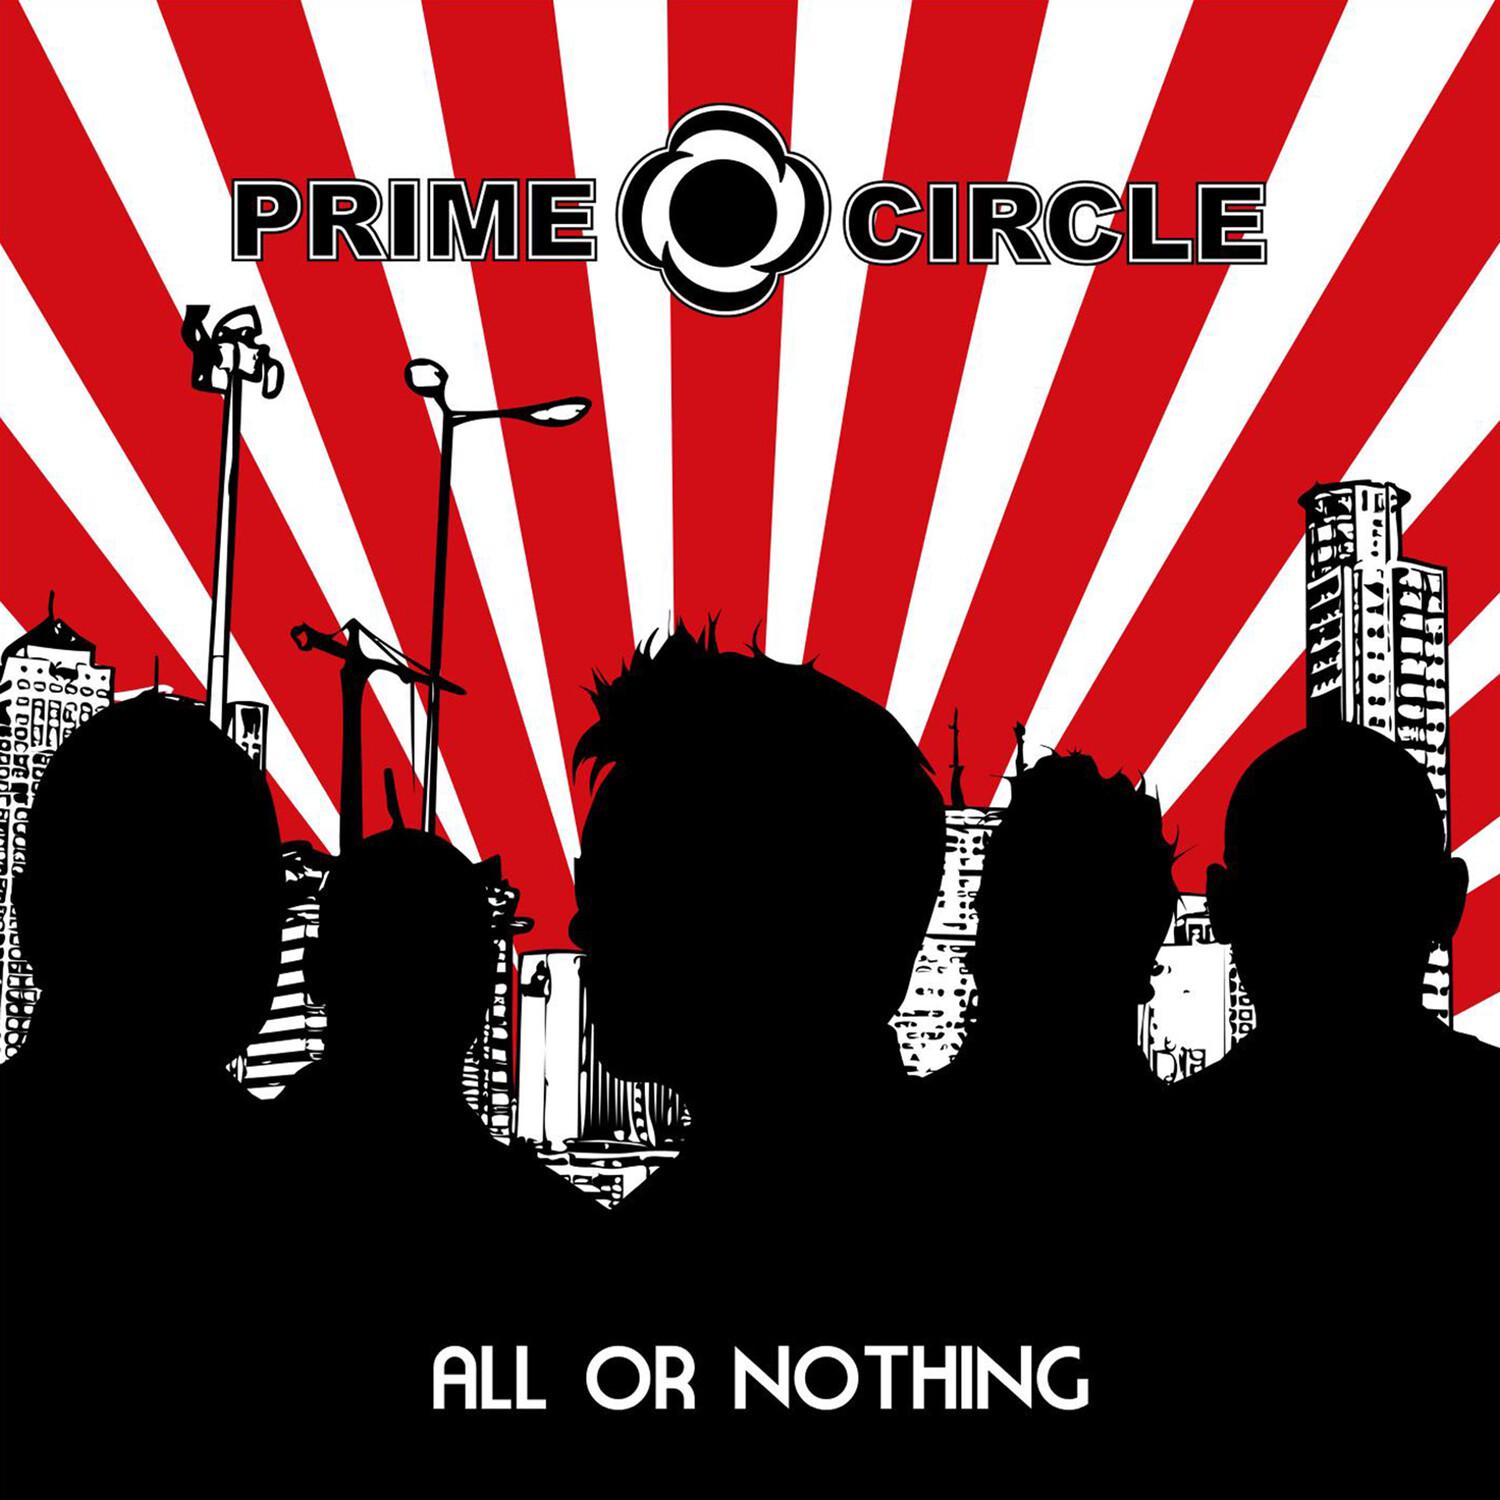 Prime Circle - Find a Way